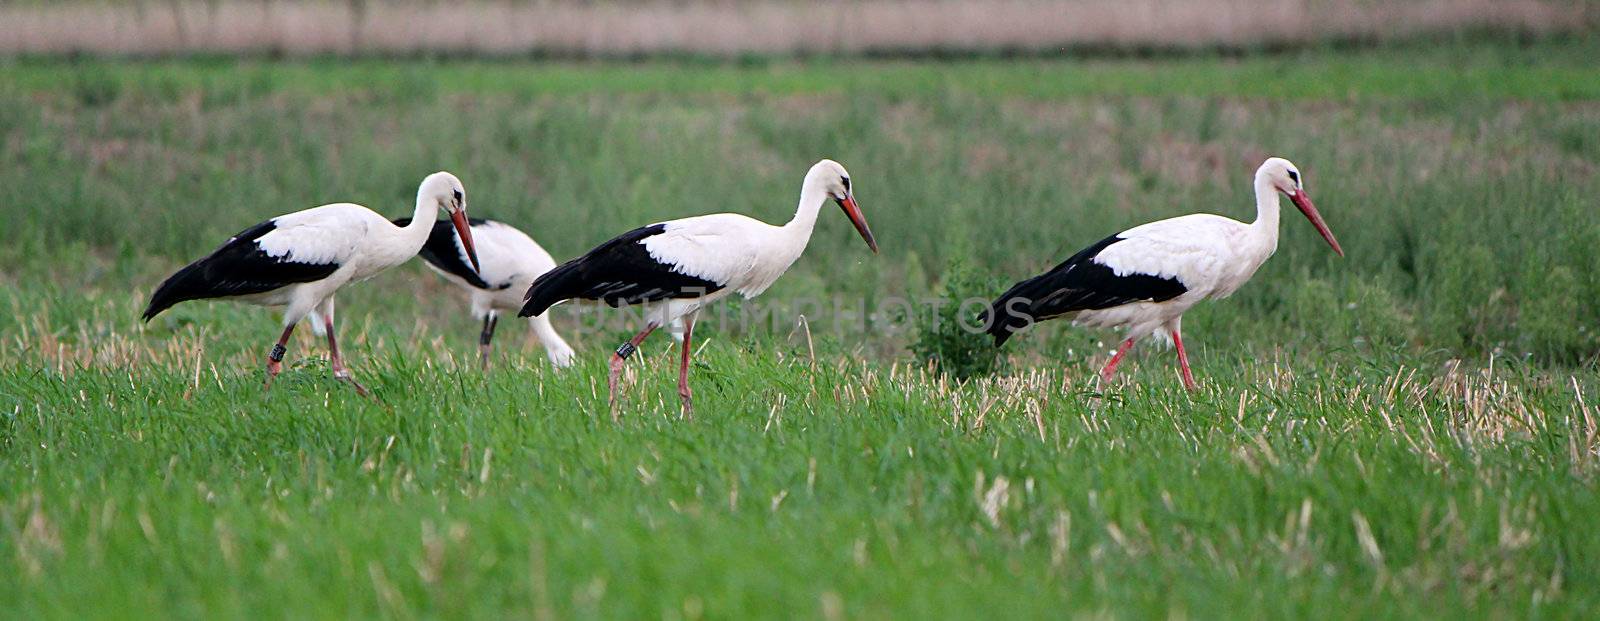 Four storks in a field by Elenaphotos21